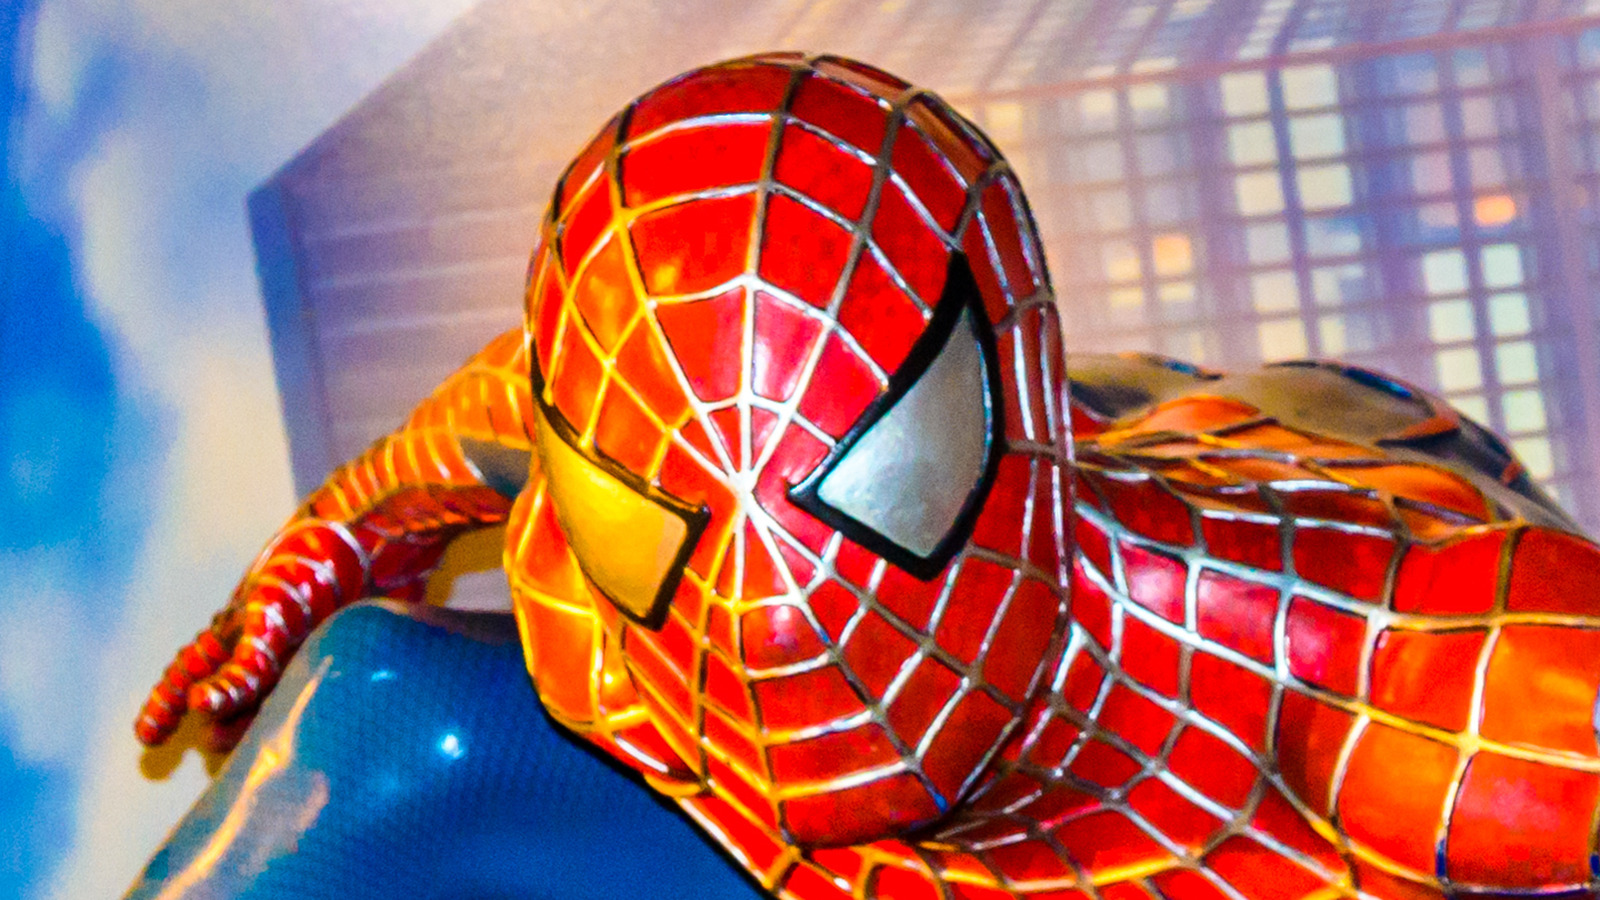 Tobey Maguire Explains What's So Special About His New Spider-Man